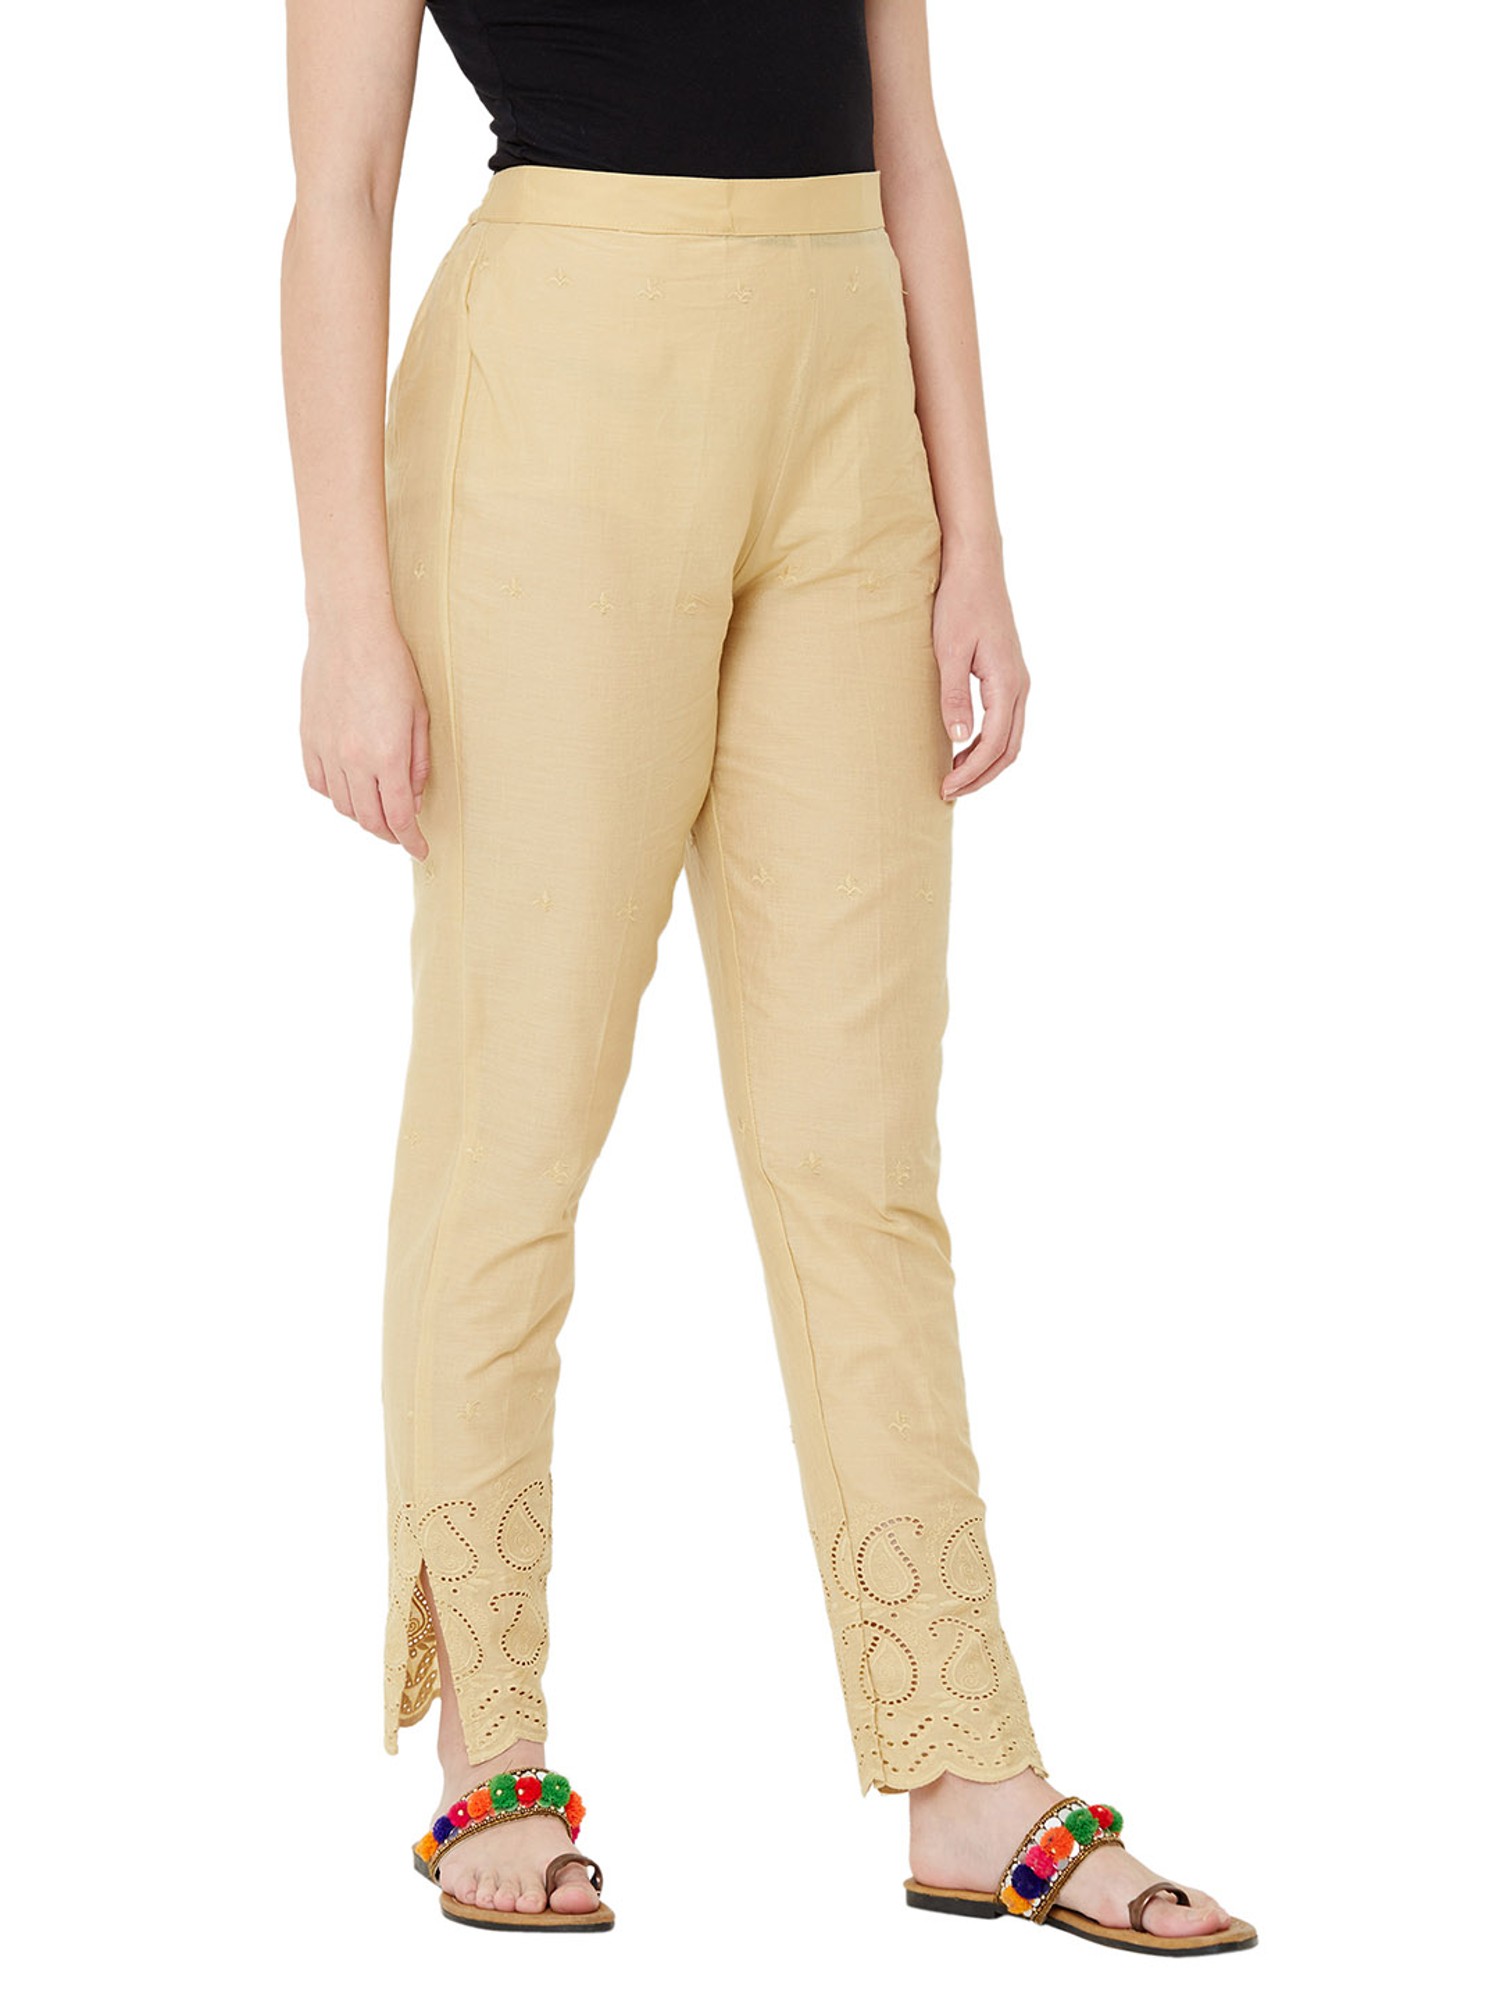 Haniya Cigarette Pants Slim Fit Women Red Trousers - Buy Red Haniya Cigarette  Pants Slim Fit Women Red Trousers Online at Best Prices in India |  Flipkart.com